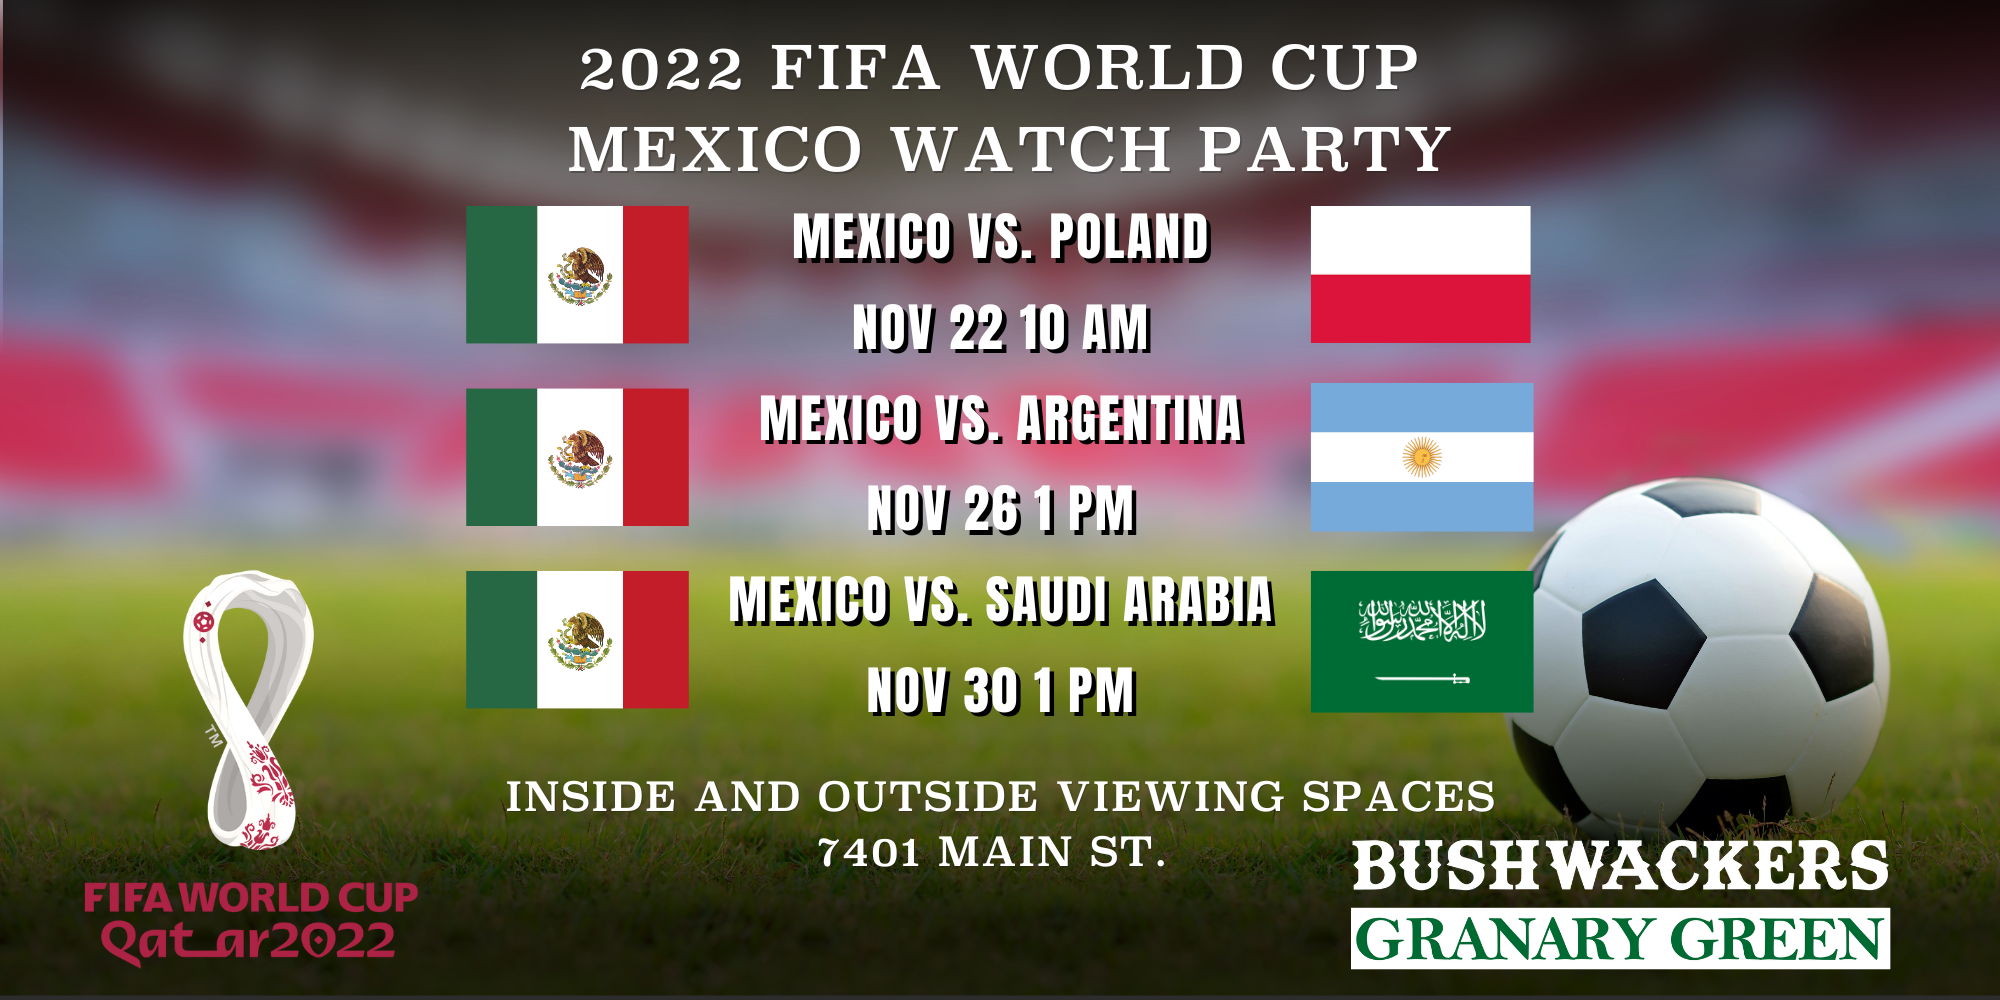 FIFA WC Mexico Watch Party - Mexico v. Argentina promotional image